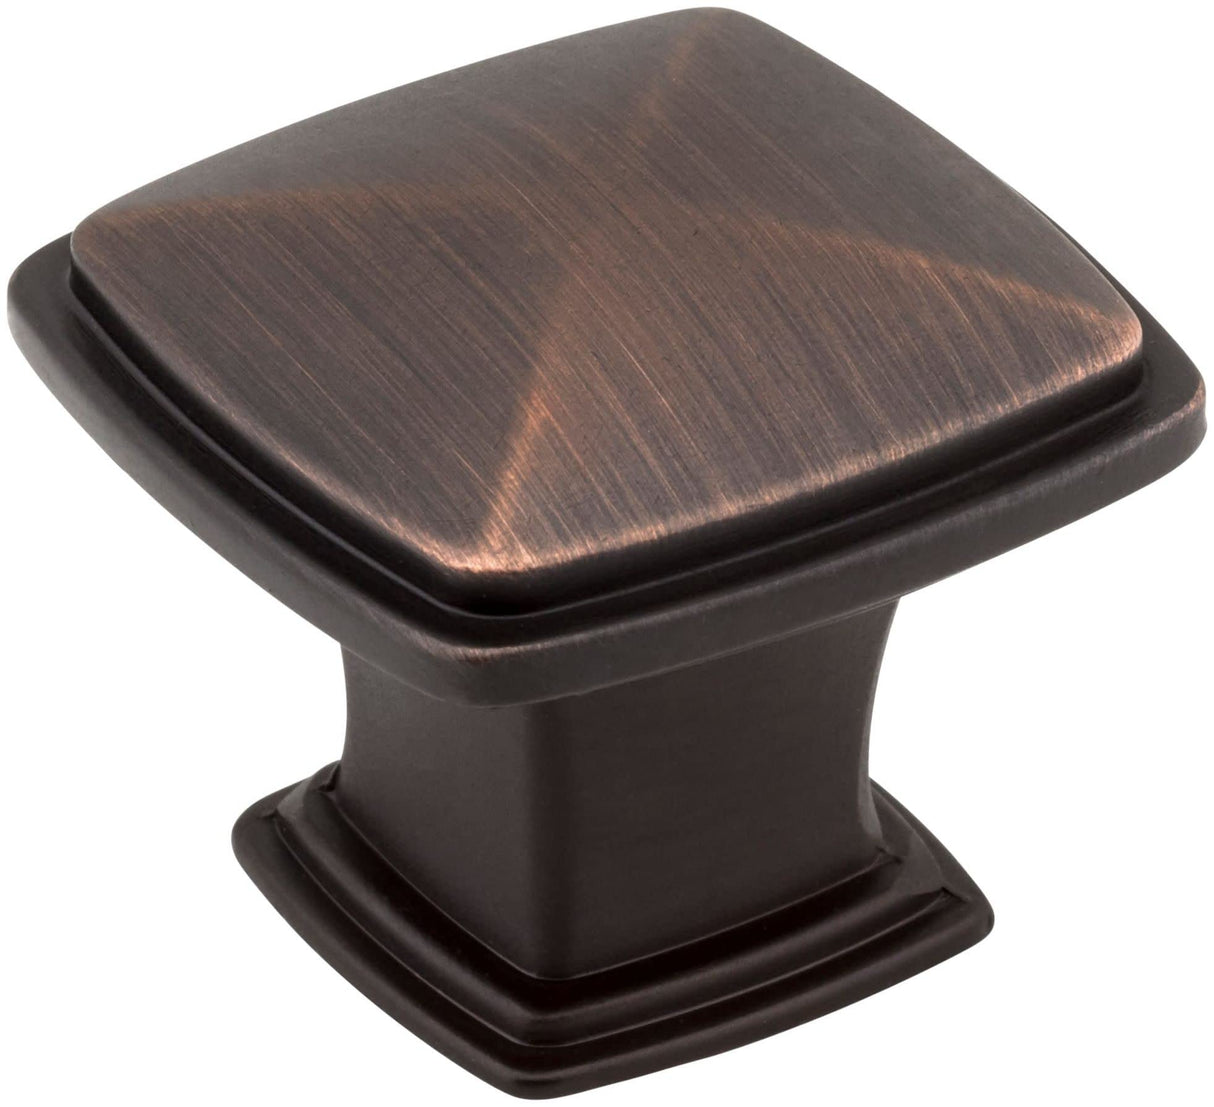 Jeffrey Alexander 1091DBAC 1-3/16" Overall Length Brushed Oil Rubbed Bronze Square Milan 1 Cabinet Knob